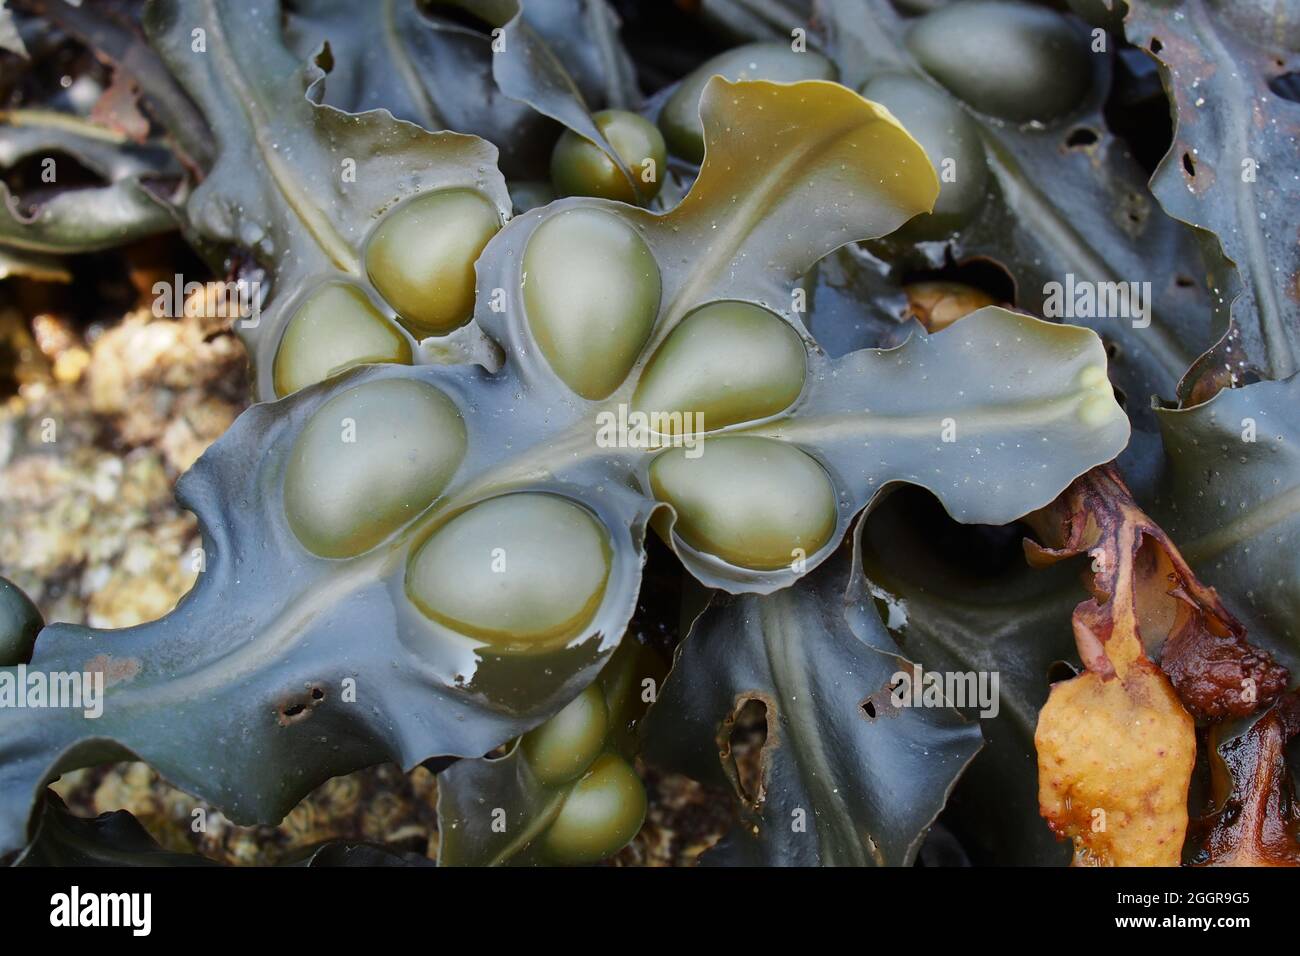 Close up of Bladder wrack seaweed at low tide on a beach Stock Photo